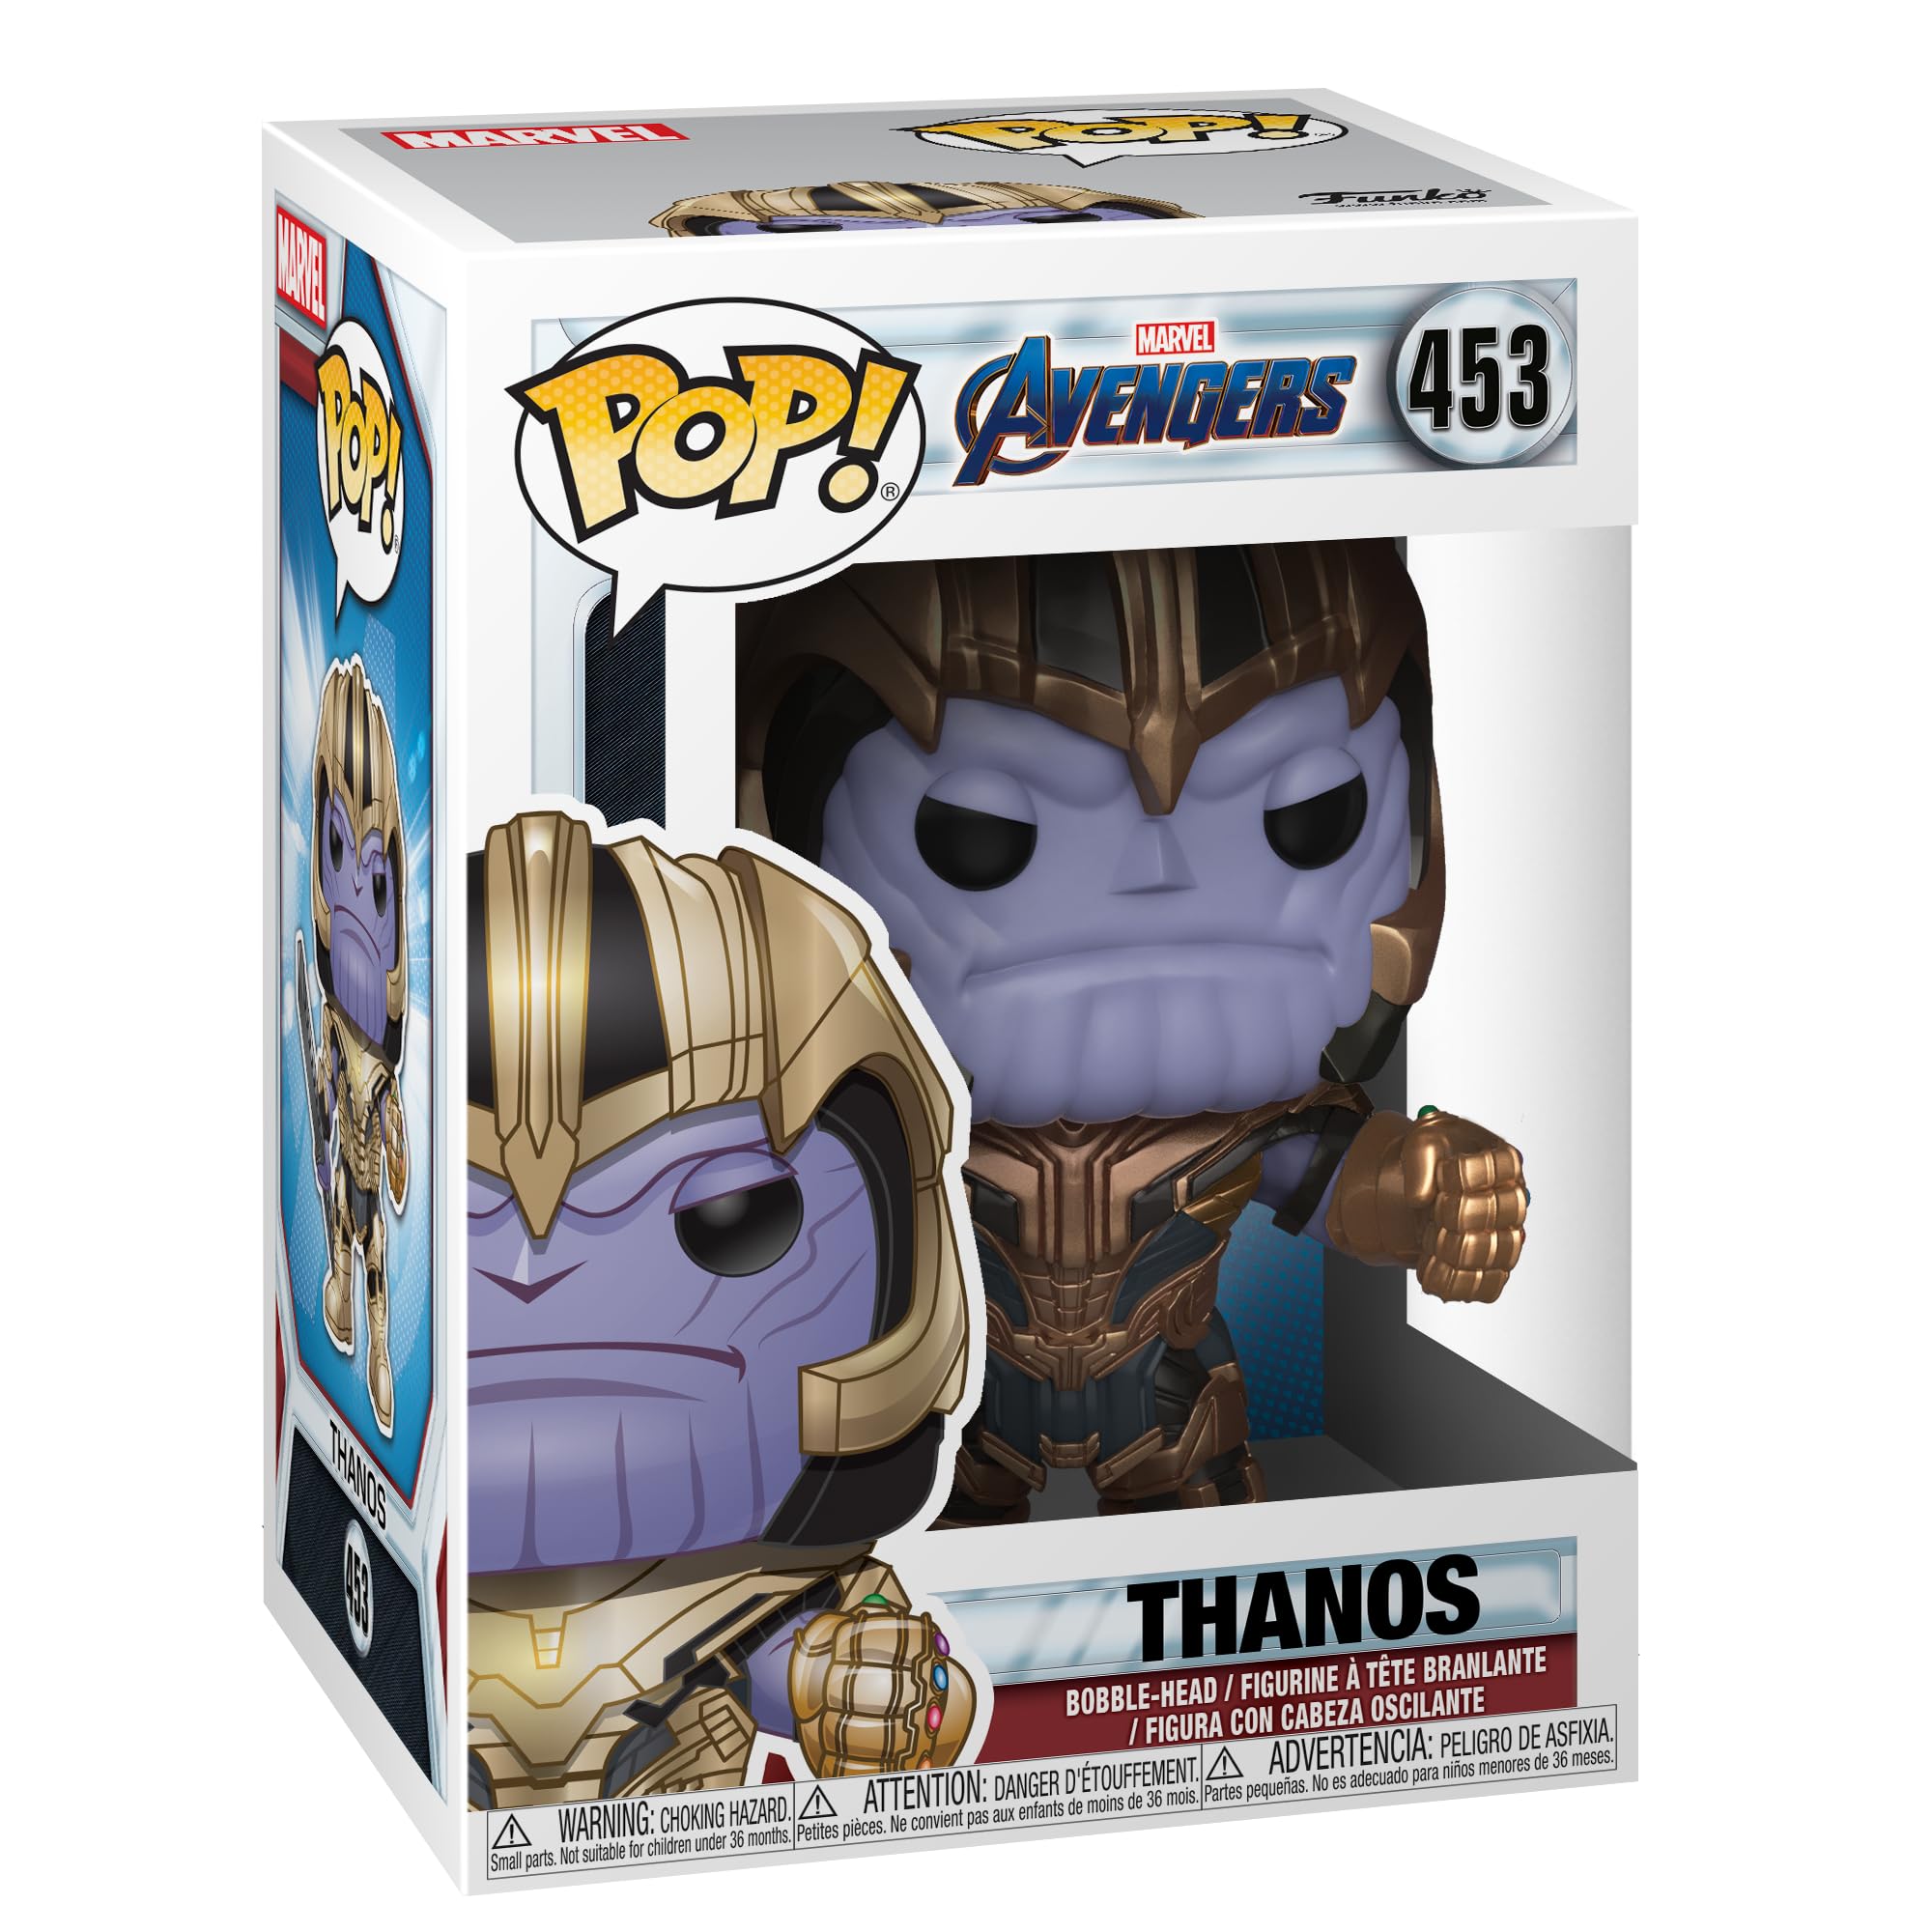 Funko POP! Marvel: Marvel Avengers Endgame - Thanos - Collectible Vinyl Figure - Gift Idea - Official Merchandise - for Kids & Adults - Movies Fans - Model Figure for Collectors and Display